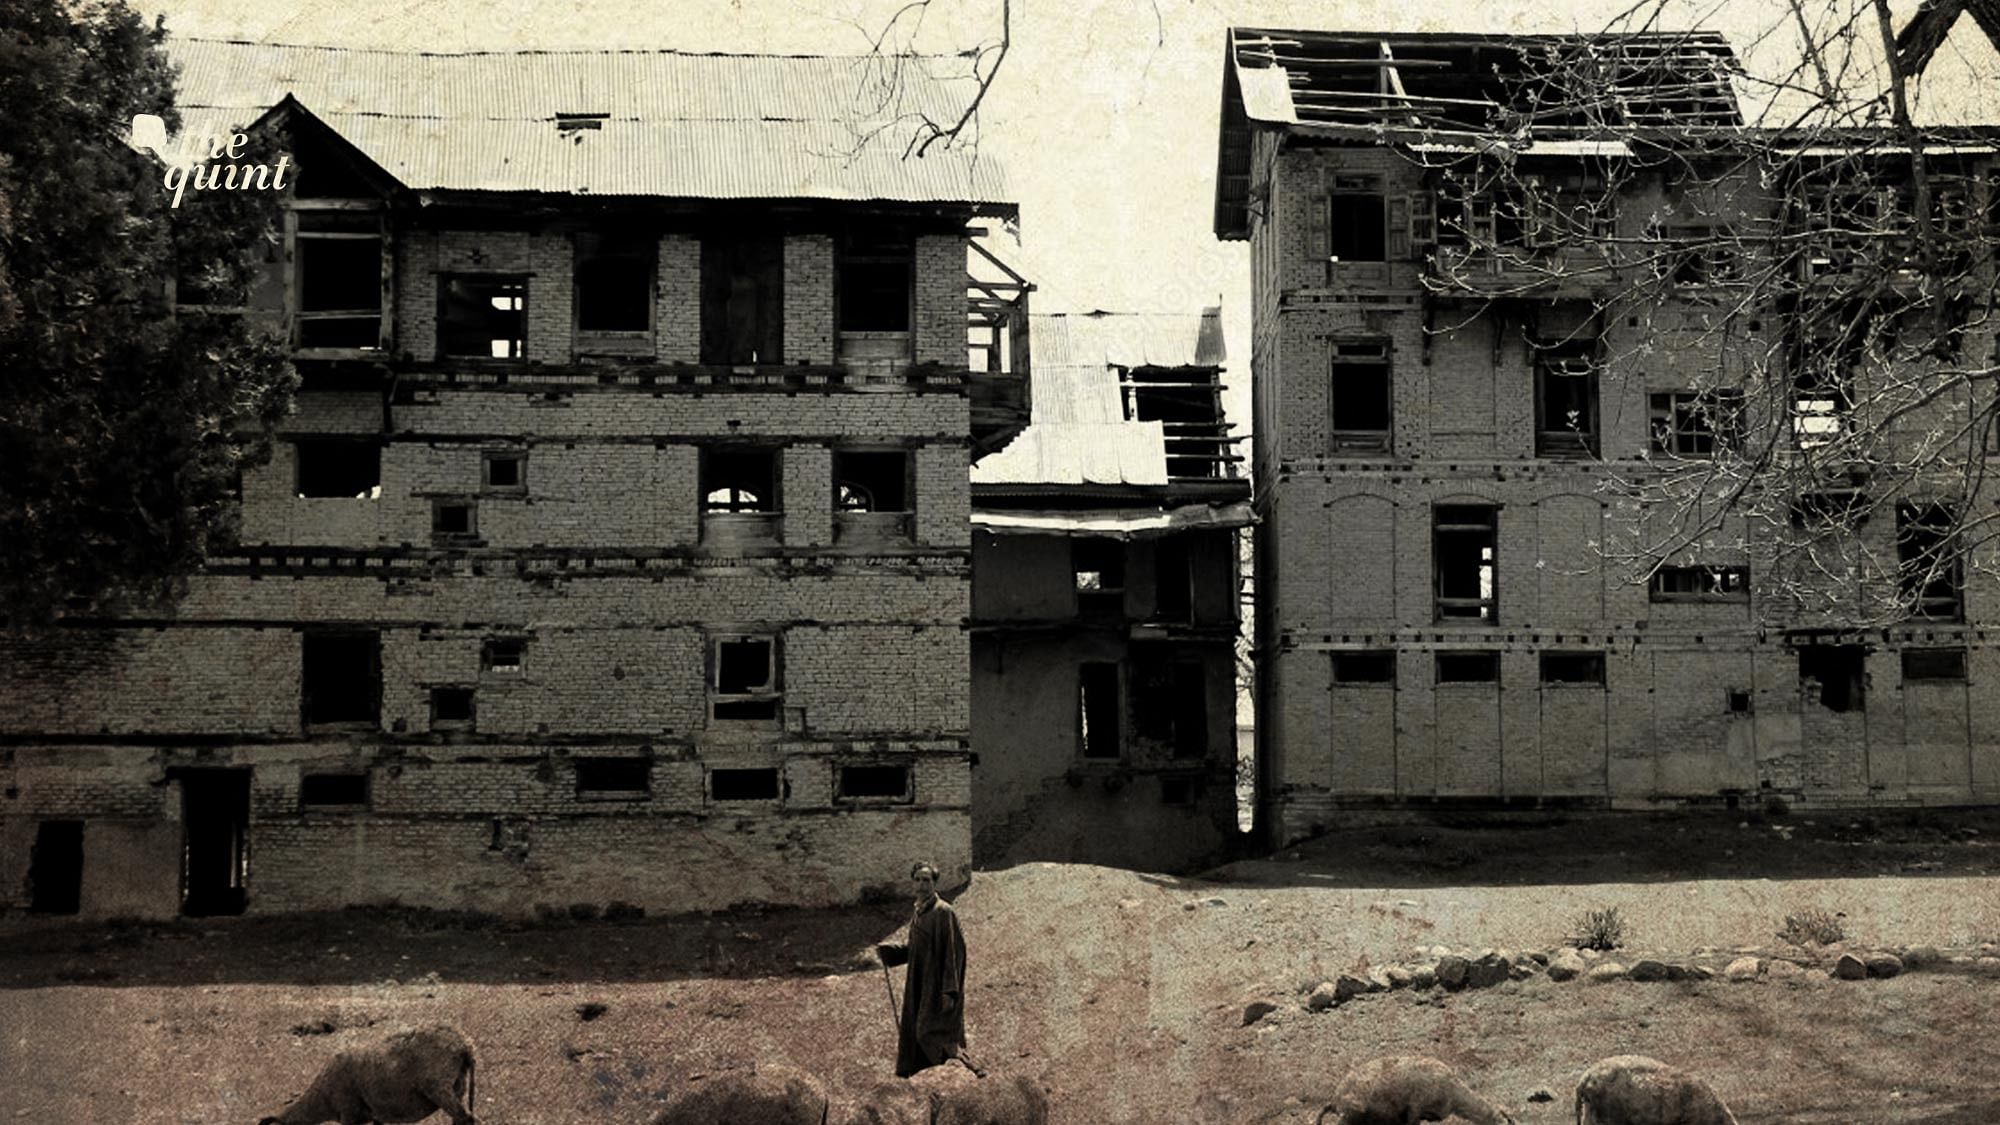  Archival image of an abandoned house of a Kashmiri Pandit used for representational purposes.